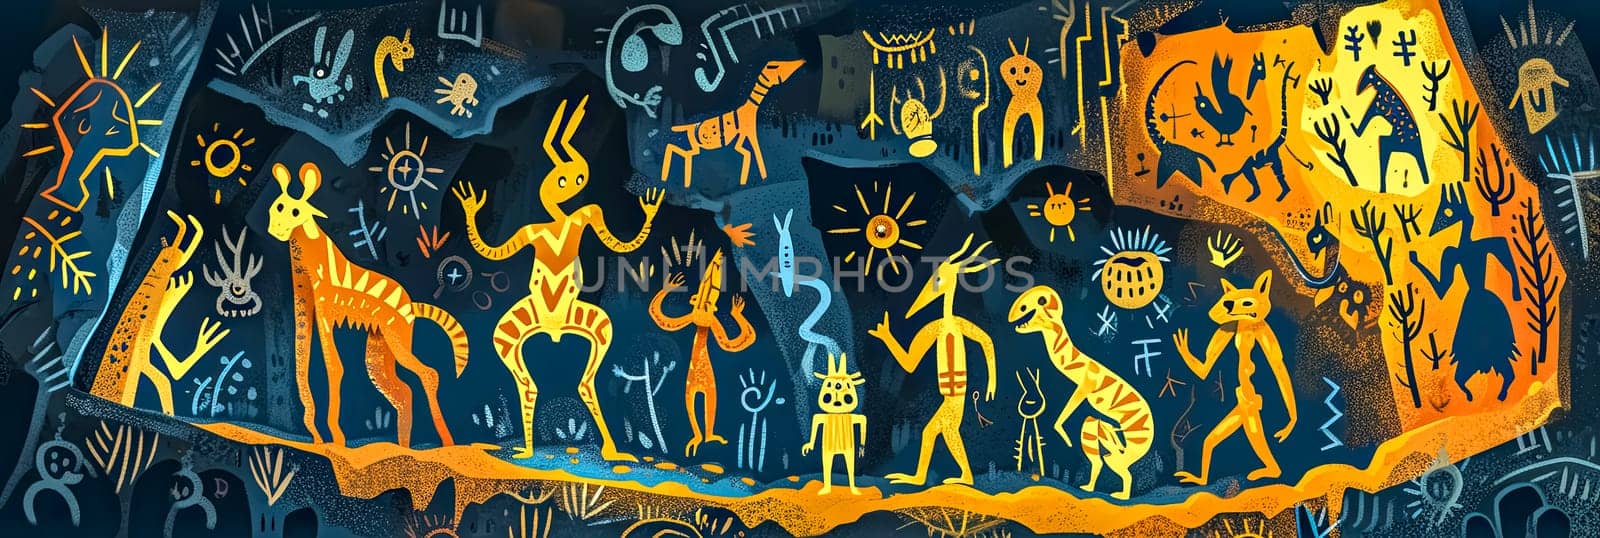 mural of cave art depicting various abstract and mythical creatures, human figures, and symbols in a vibrant array of orange, yellow, and blue hues. by Edophoto